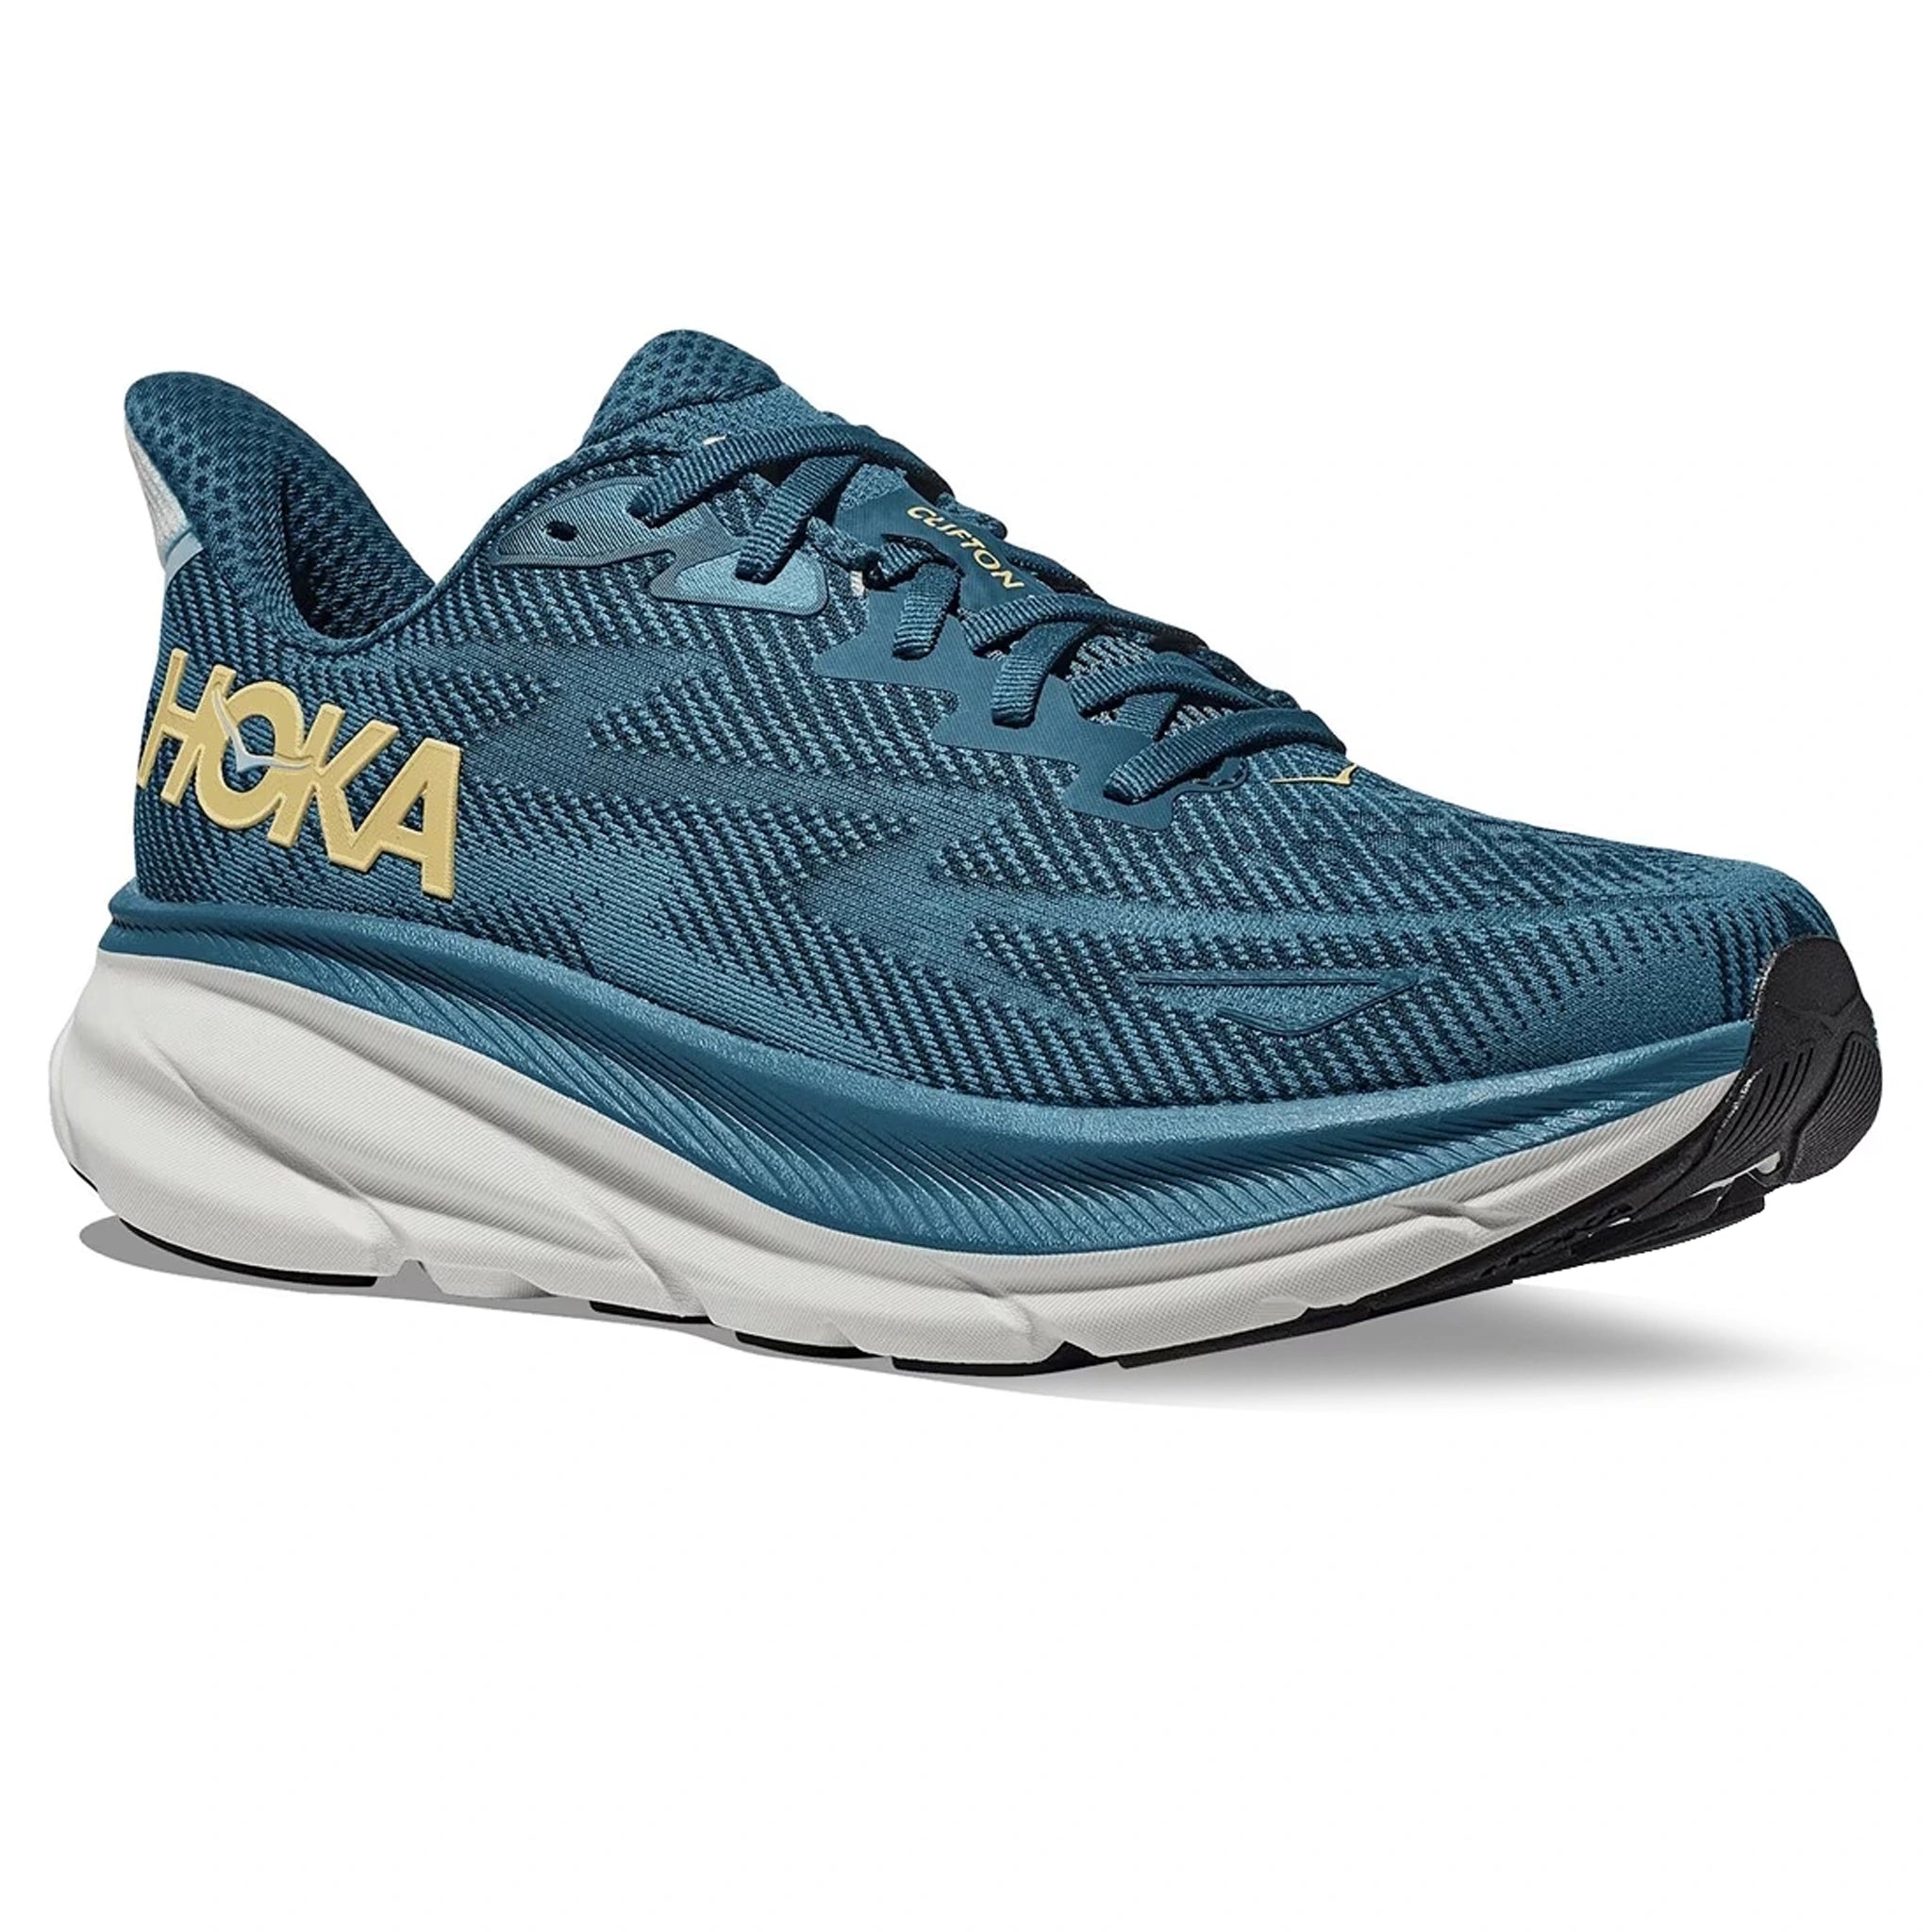 Side Detail view of Hoka Clifton 9 Midnight Steel 196565550965